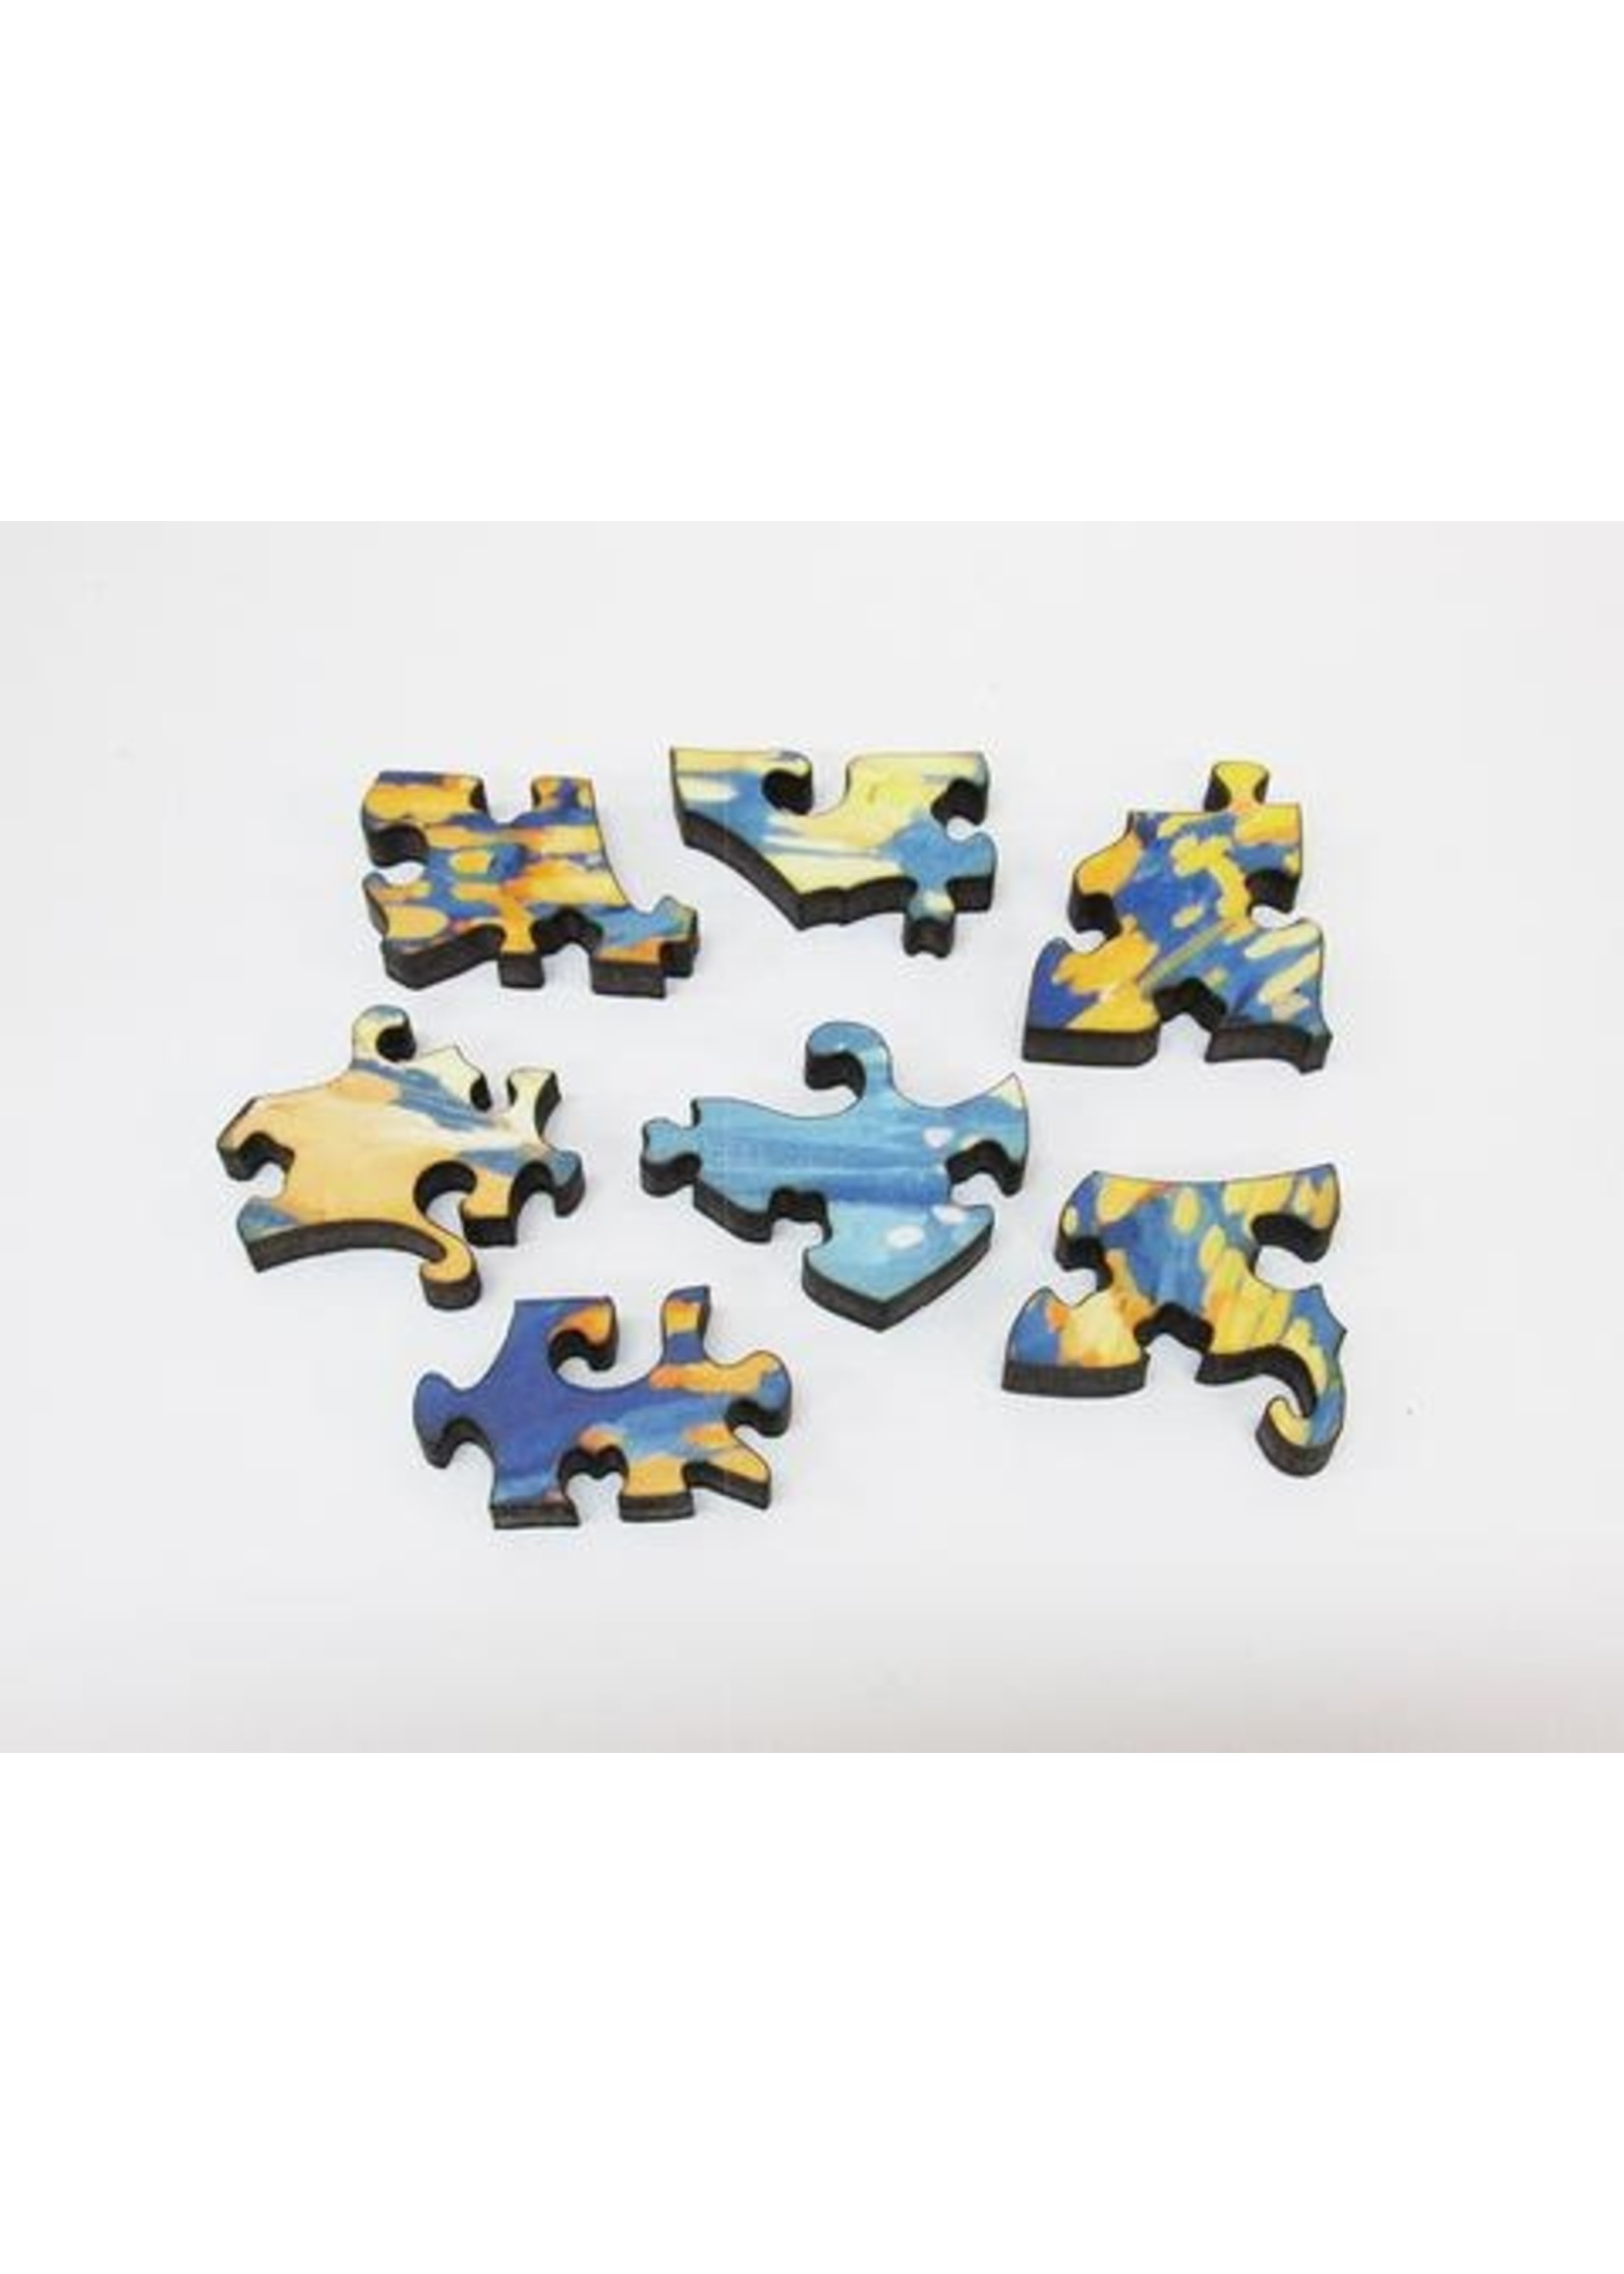 Artifact Puzzles "Sandpipers" Artifact Wooden Jigsaw Puzzle